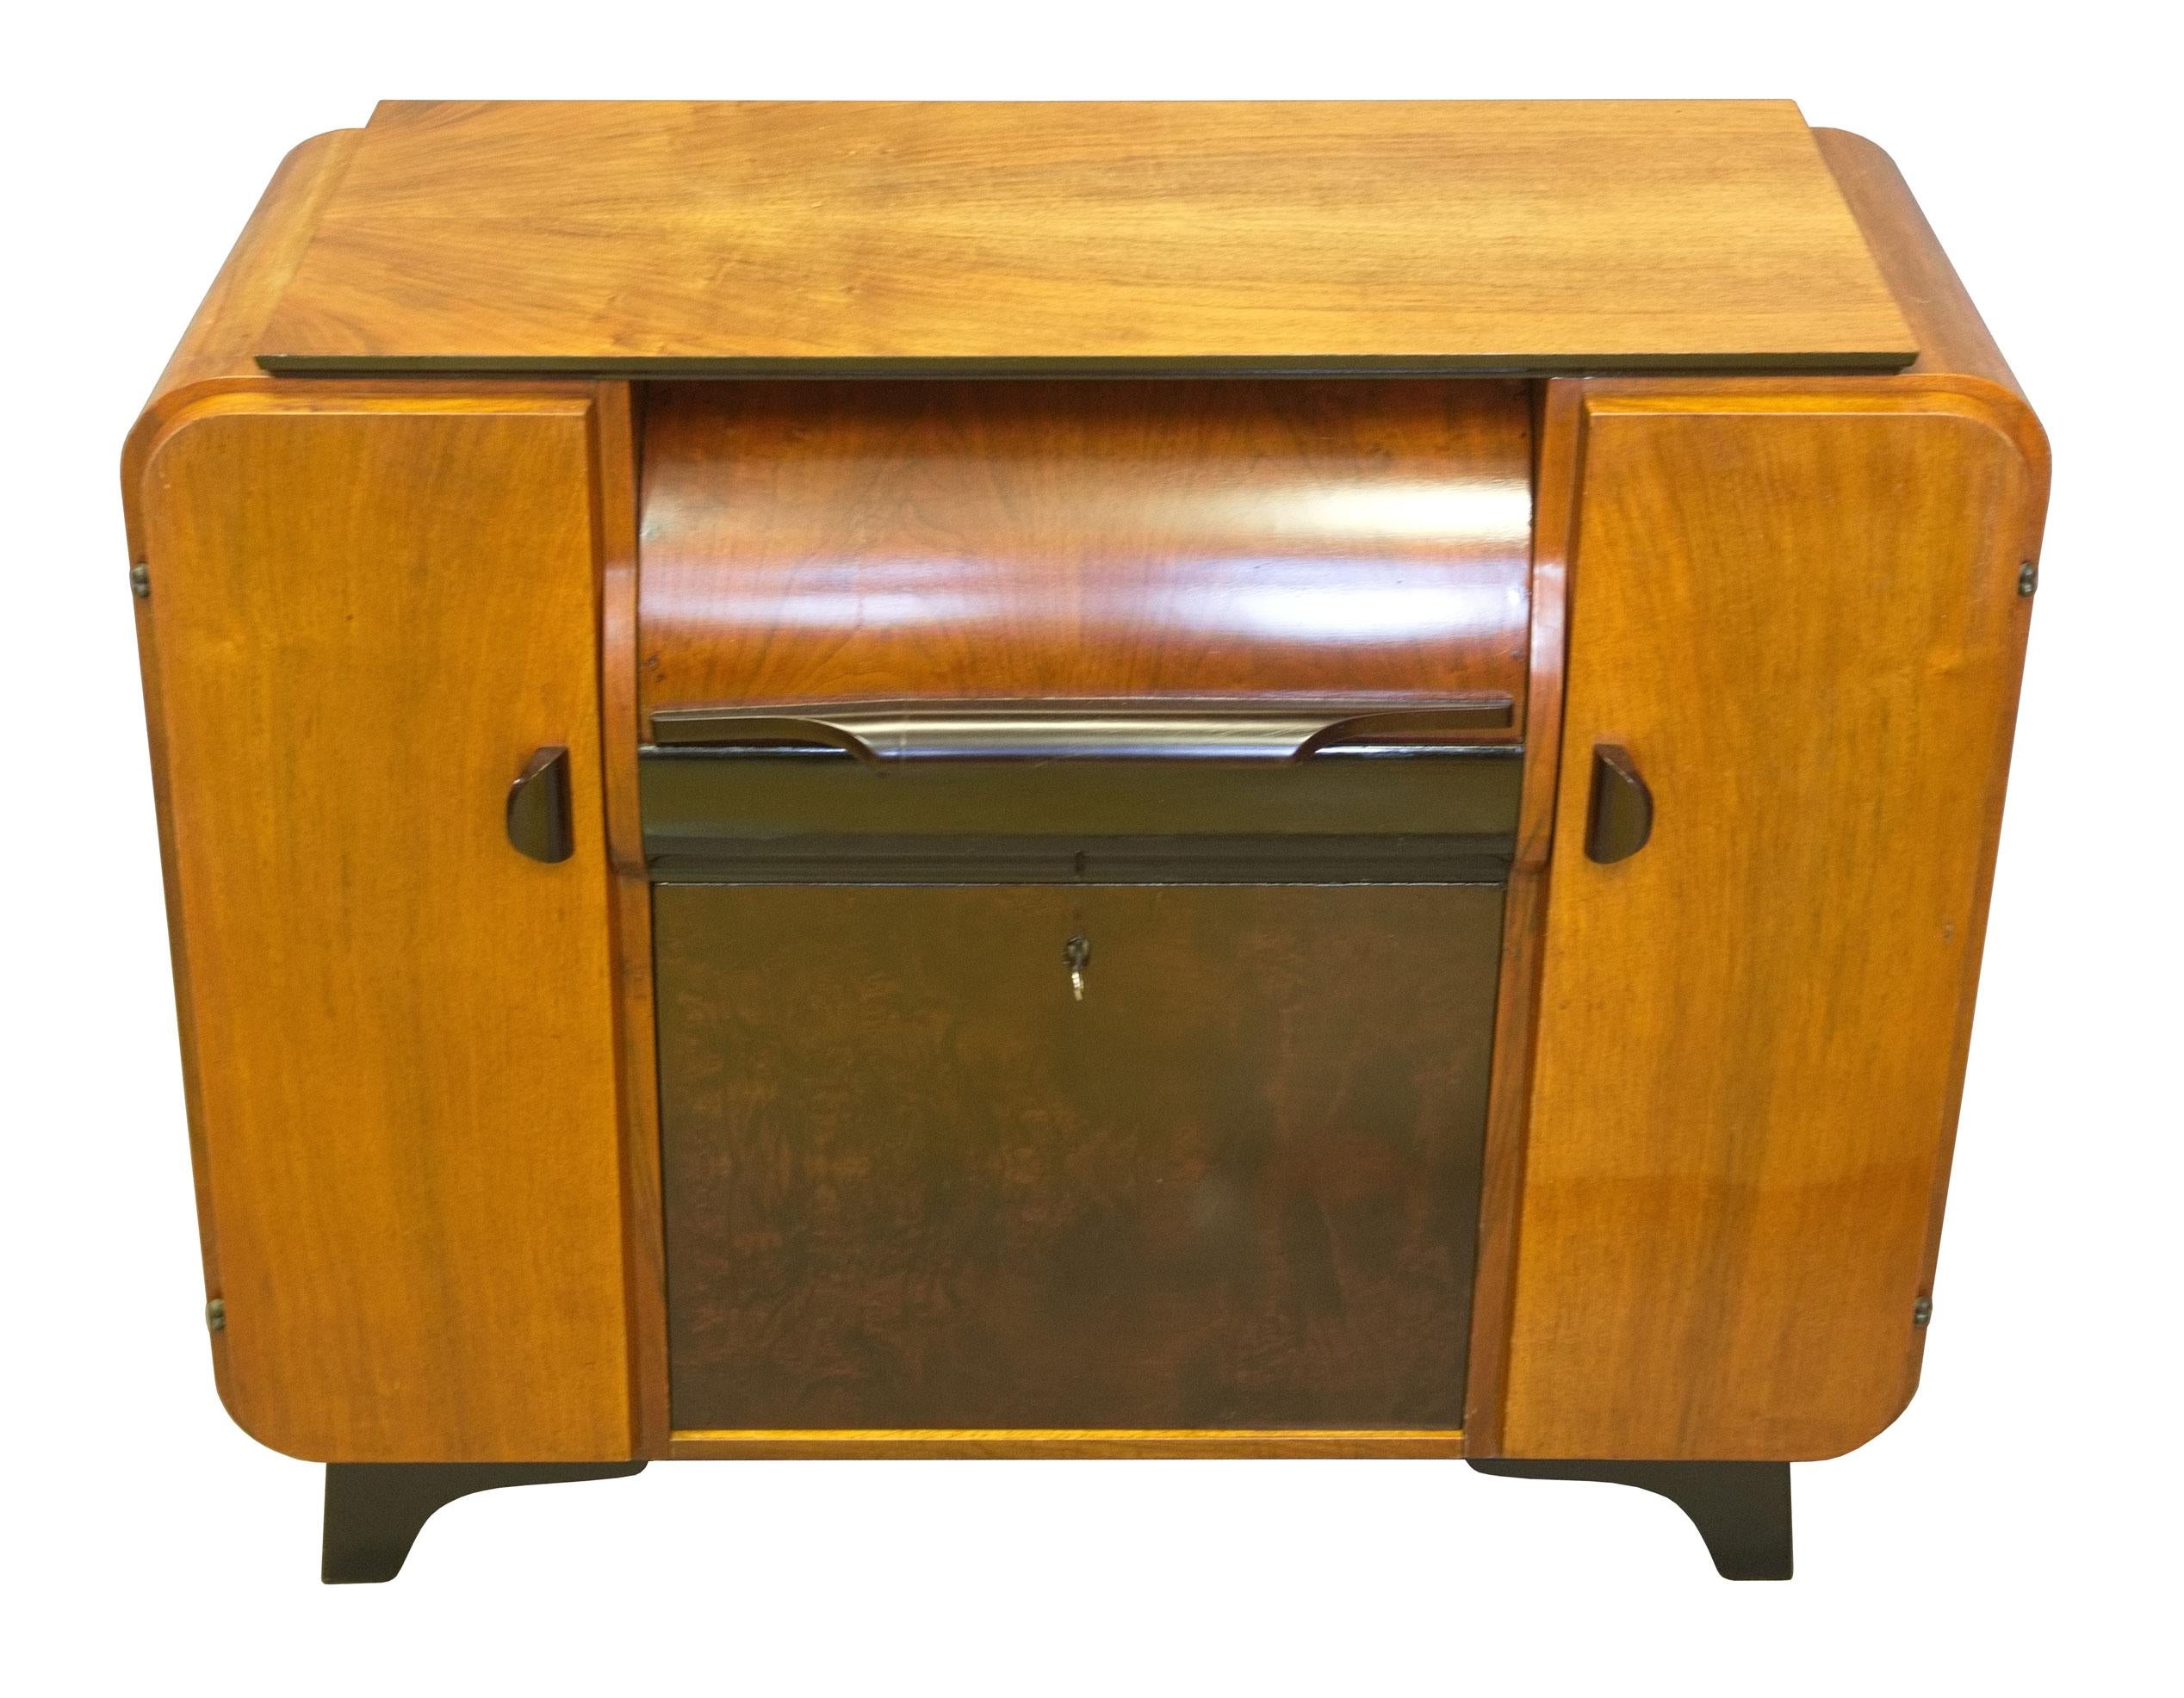 This music cabinet was originally designed by Jindrich Halabala in the 1930s and was produced by renowned UP Brno Furniture factory. Due to its popularity it stayed in production after the WW2 and was made in various types until the 1960s. The